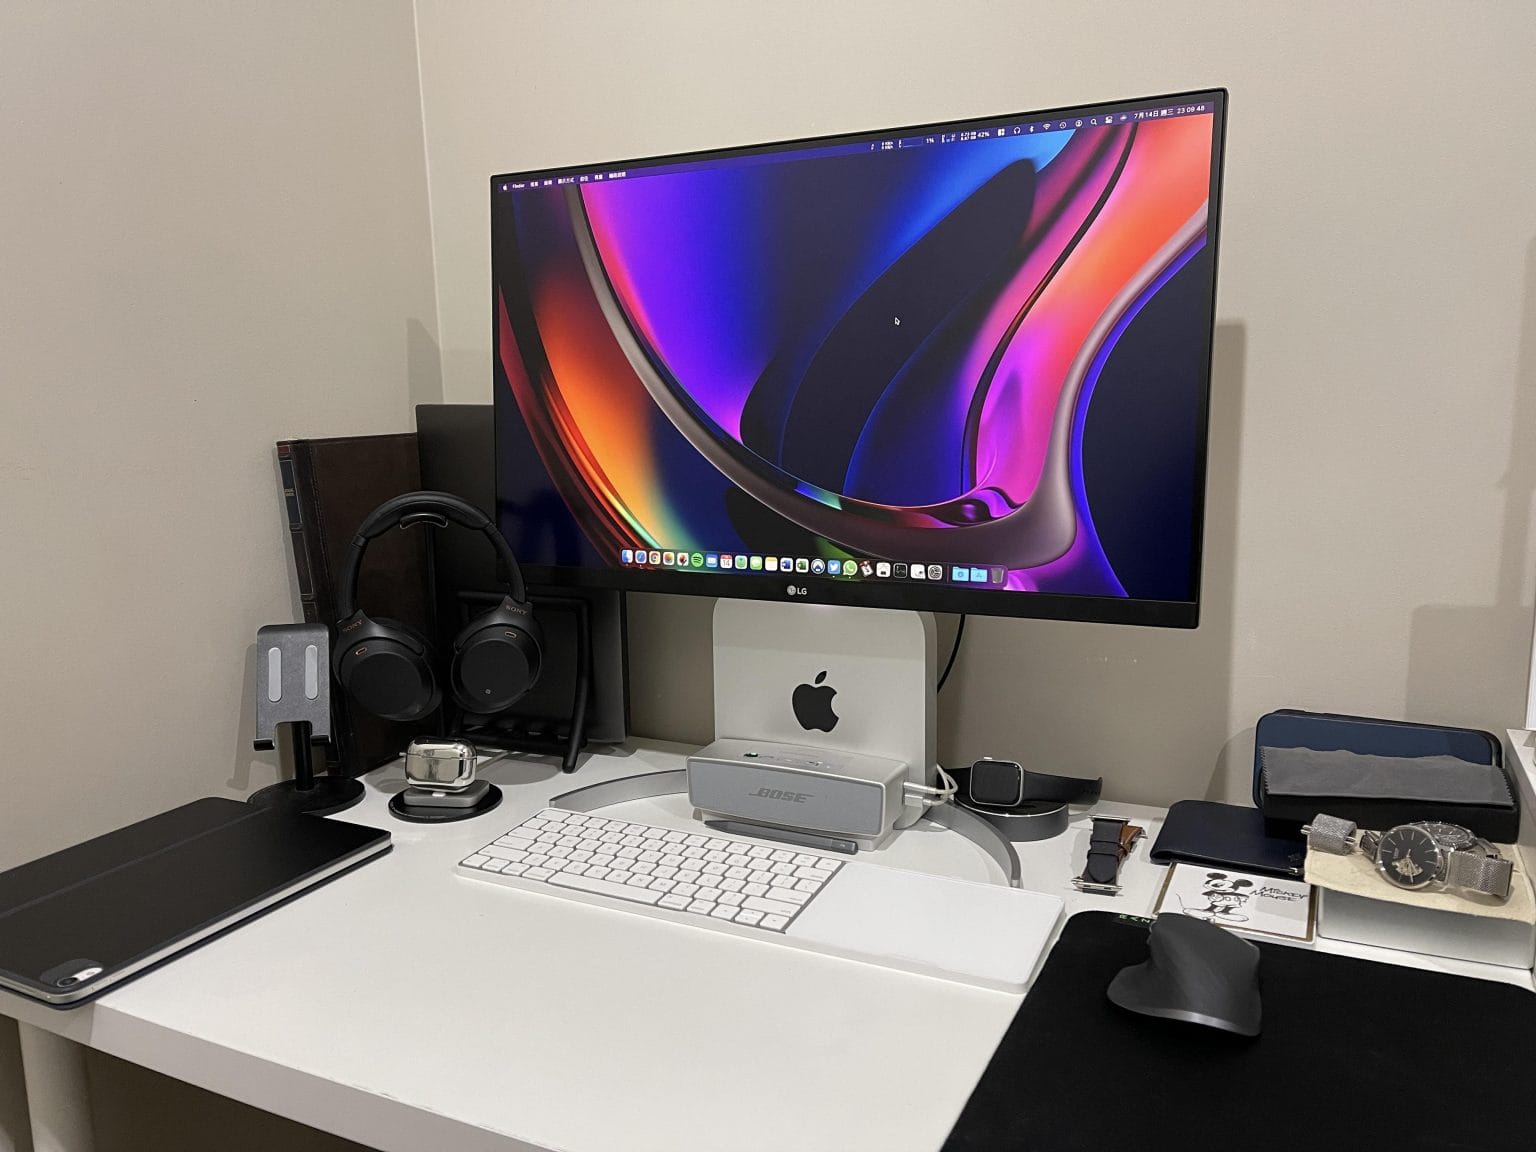 You can stand your Mac mini vertically or mount it behind the monitor or under the desk.